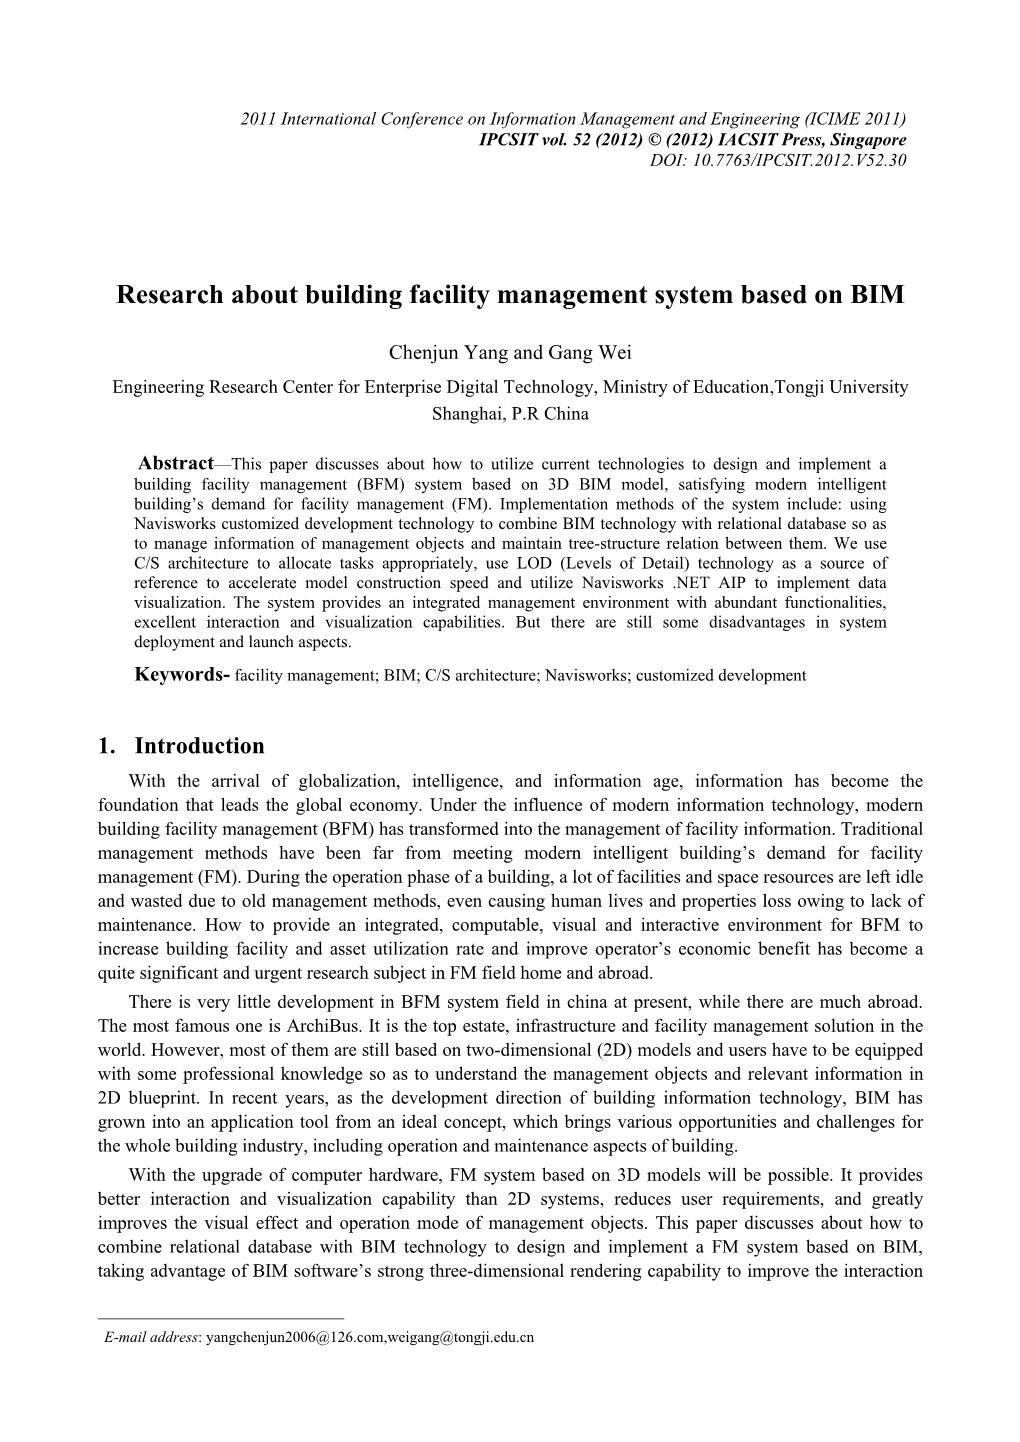 Research About Building Facility Management System Based on BIM